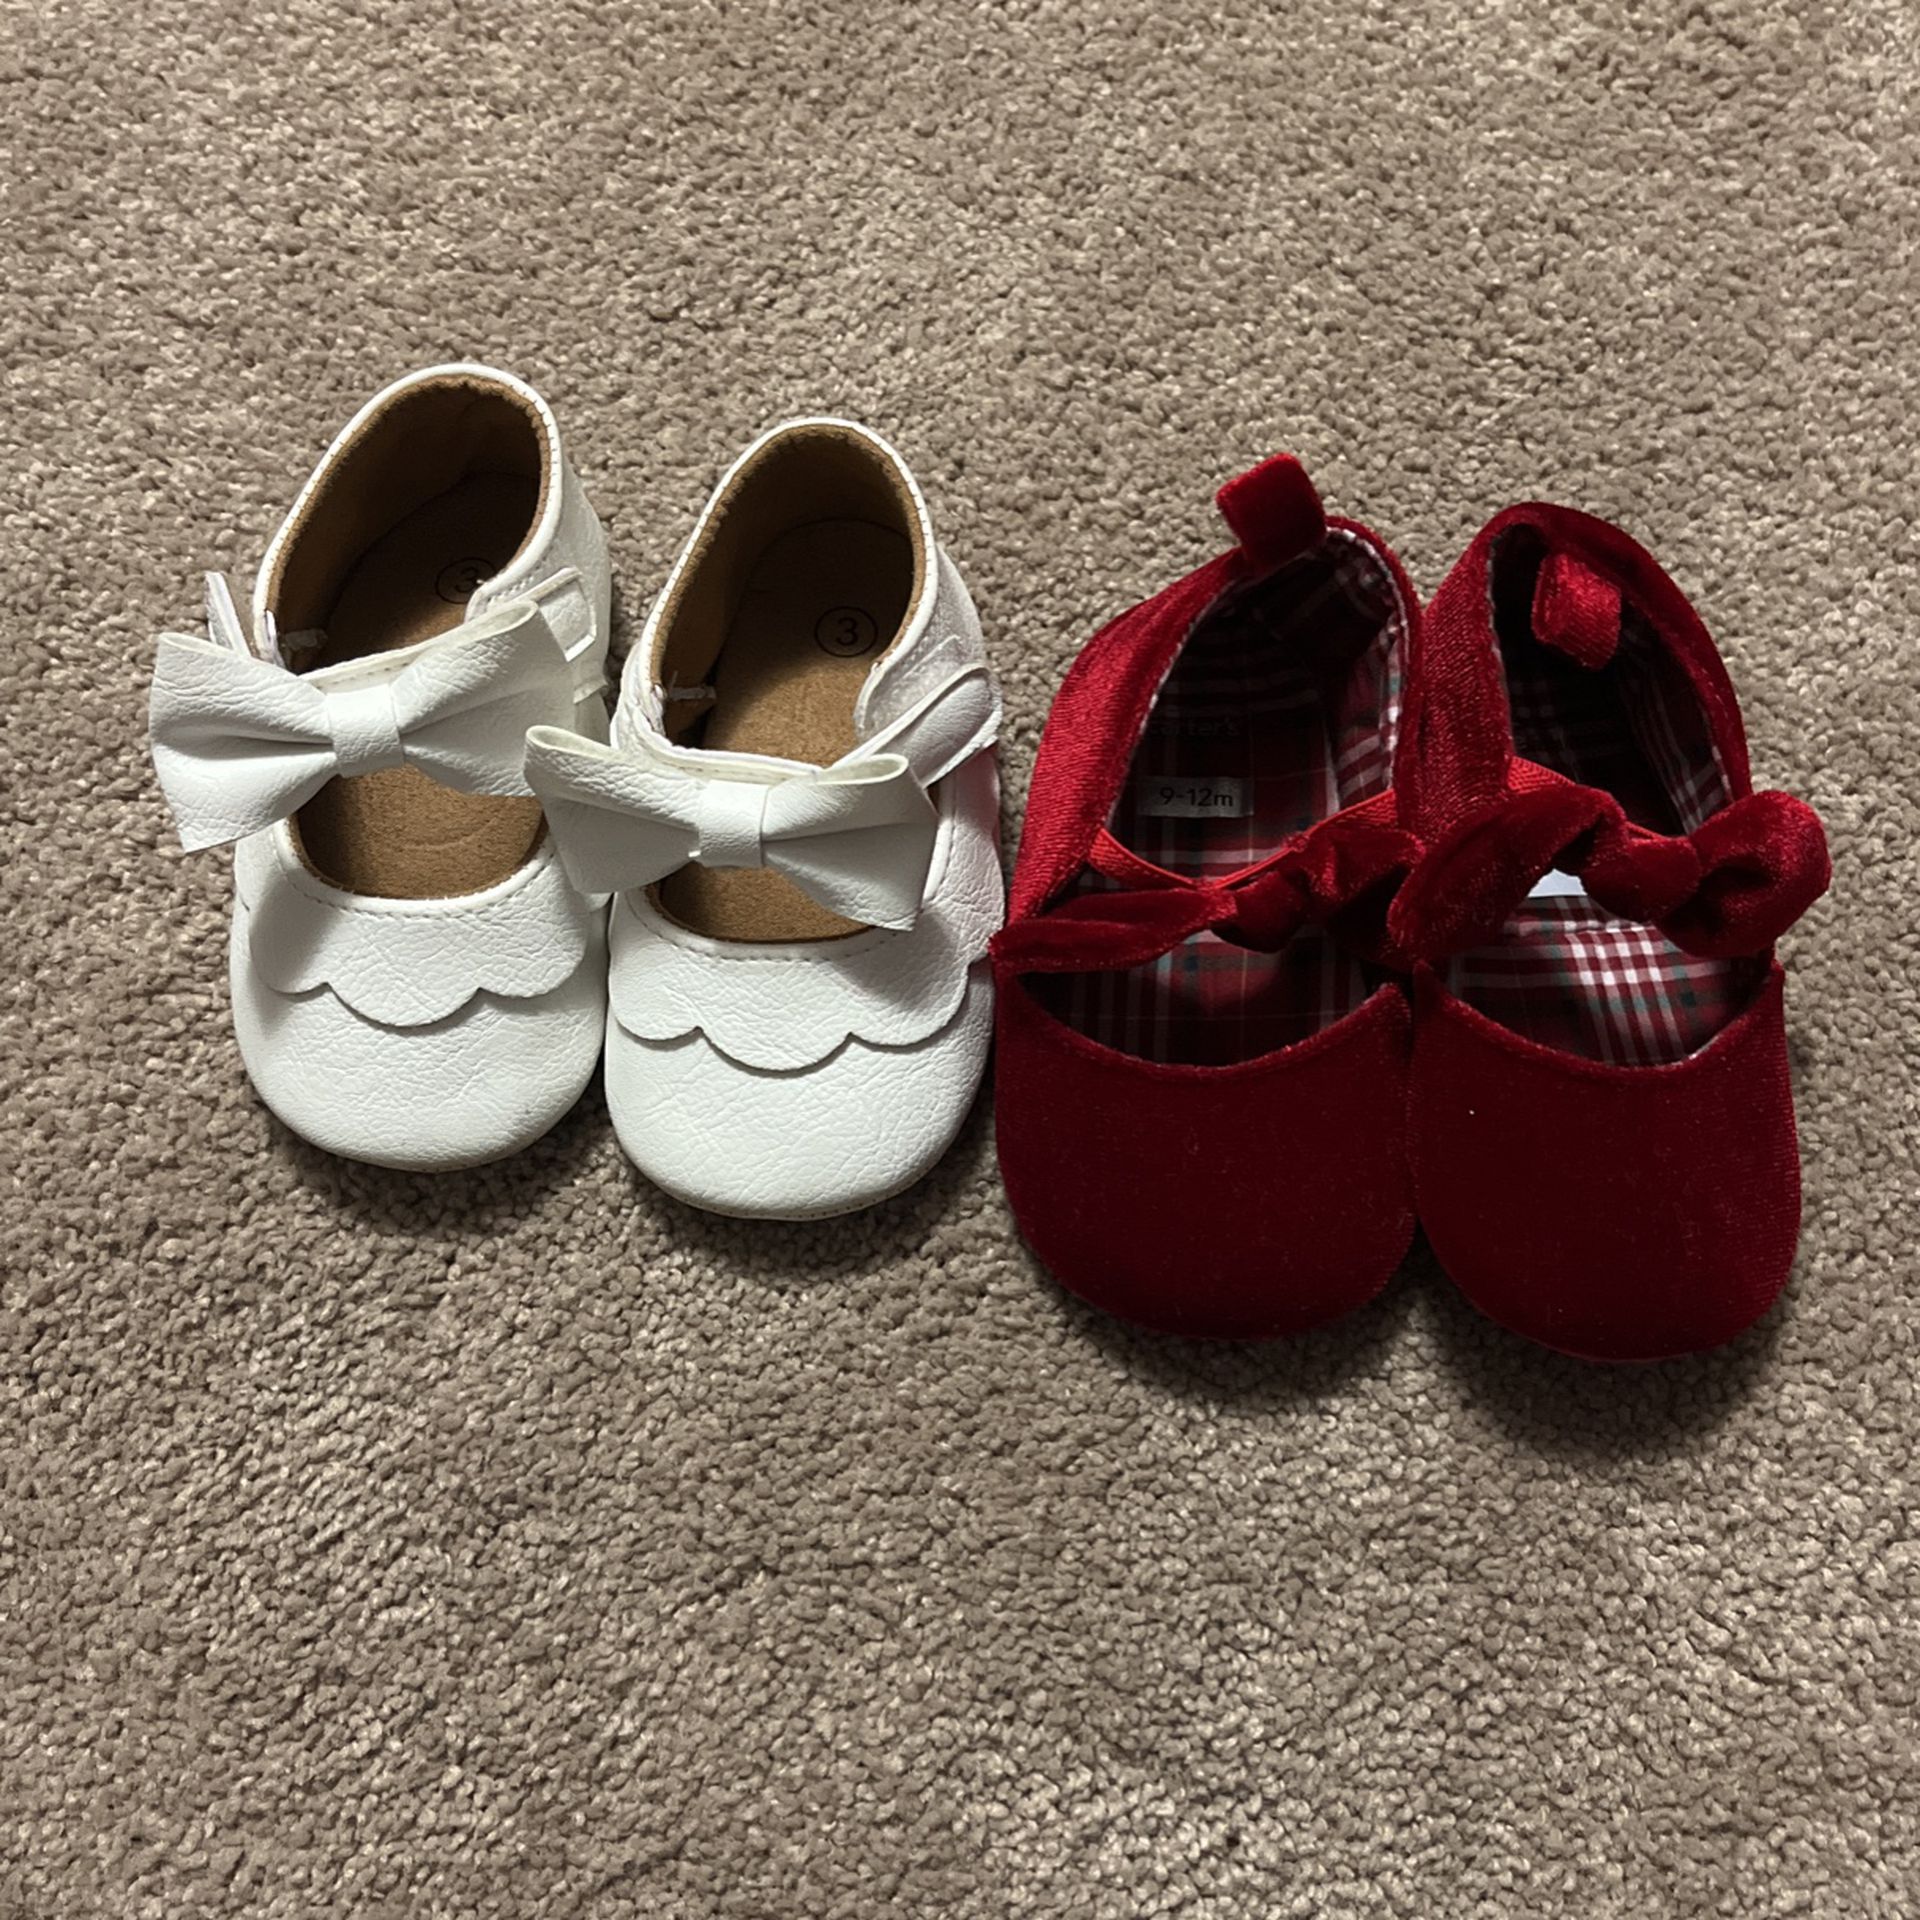 Toddler dress shoes